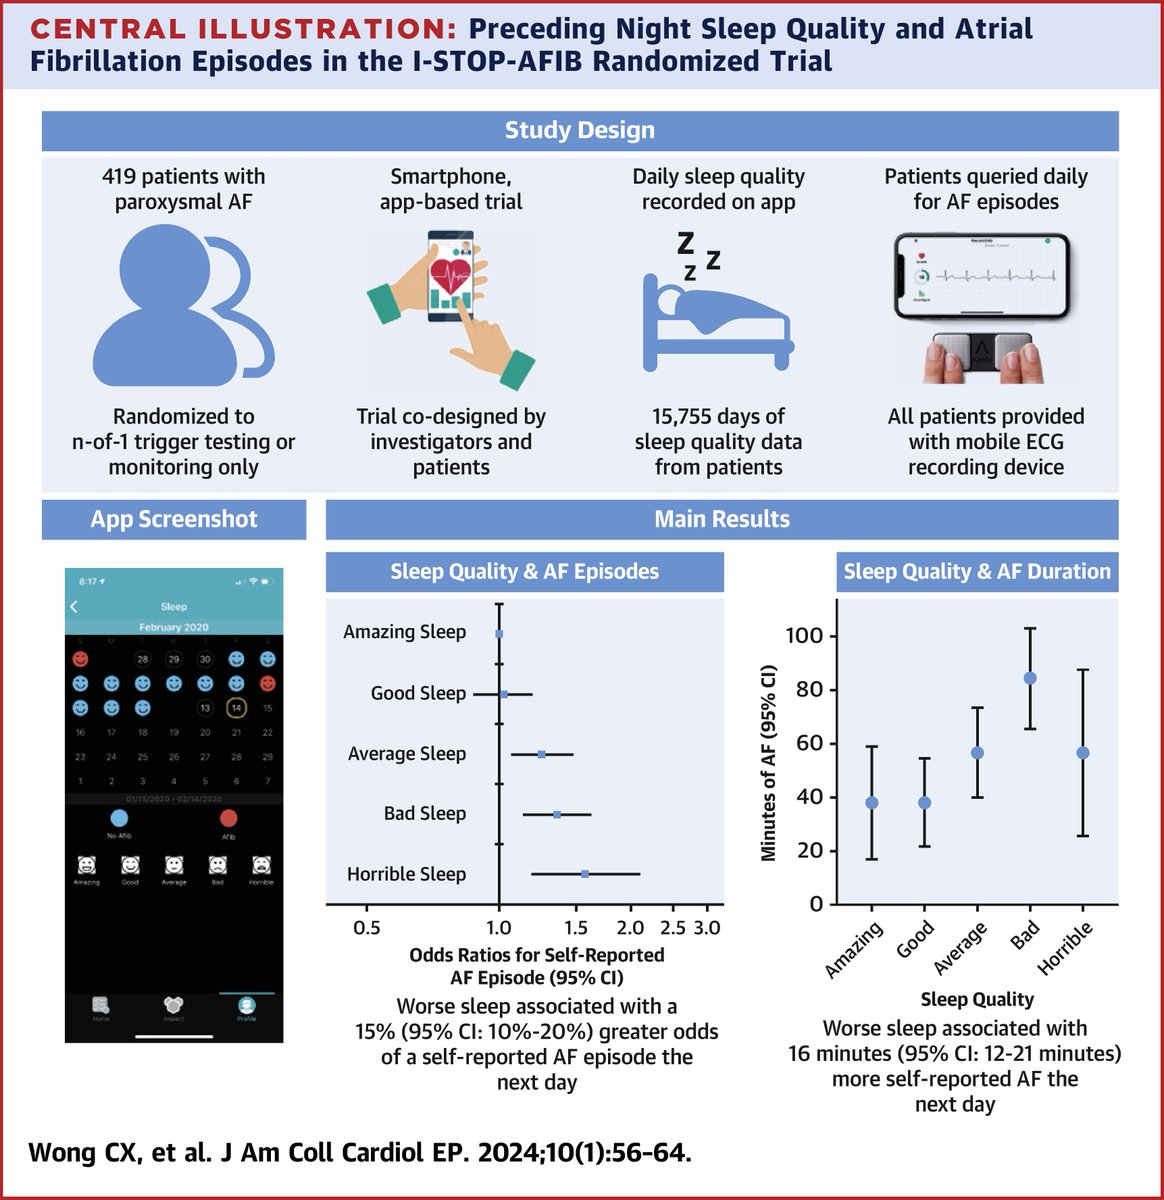 Poor sleep was associated with an immediately heightened risk for self-reported AF episodes, and a dose-response relationship existed such that progressively worse sleep was associated with longer episodes of AF the next day. bit.ly/3HPDHIQ #JACCCEP #AFib #EPeeps